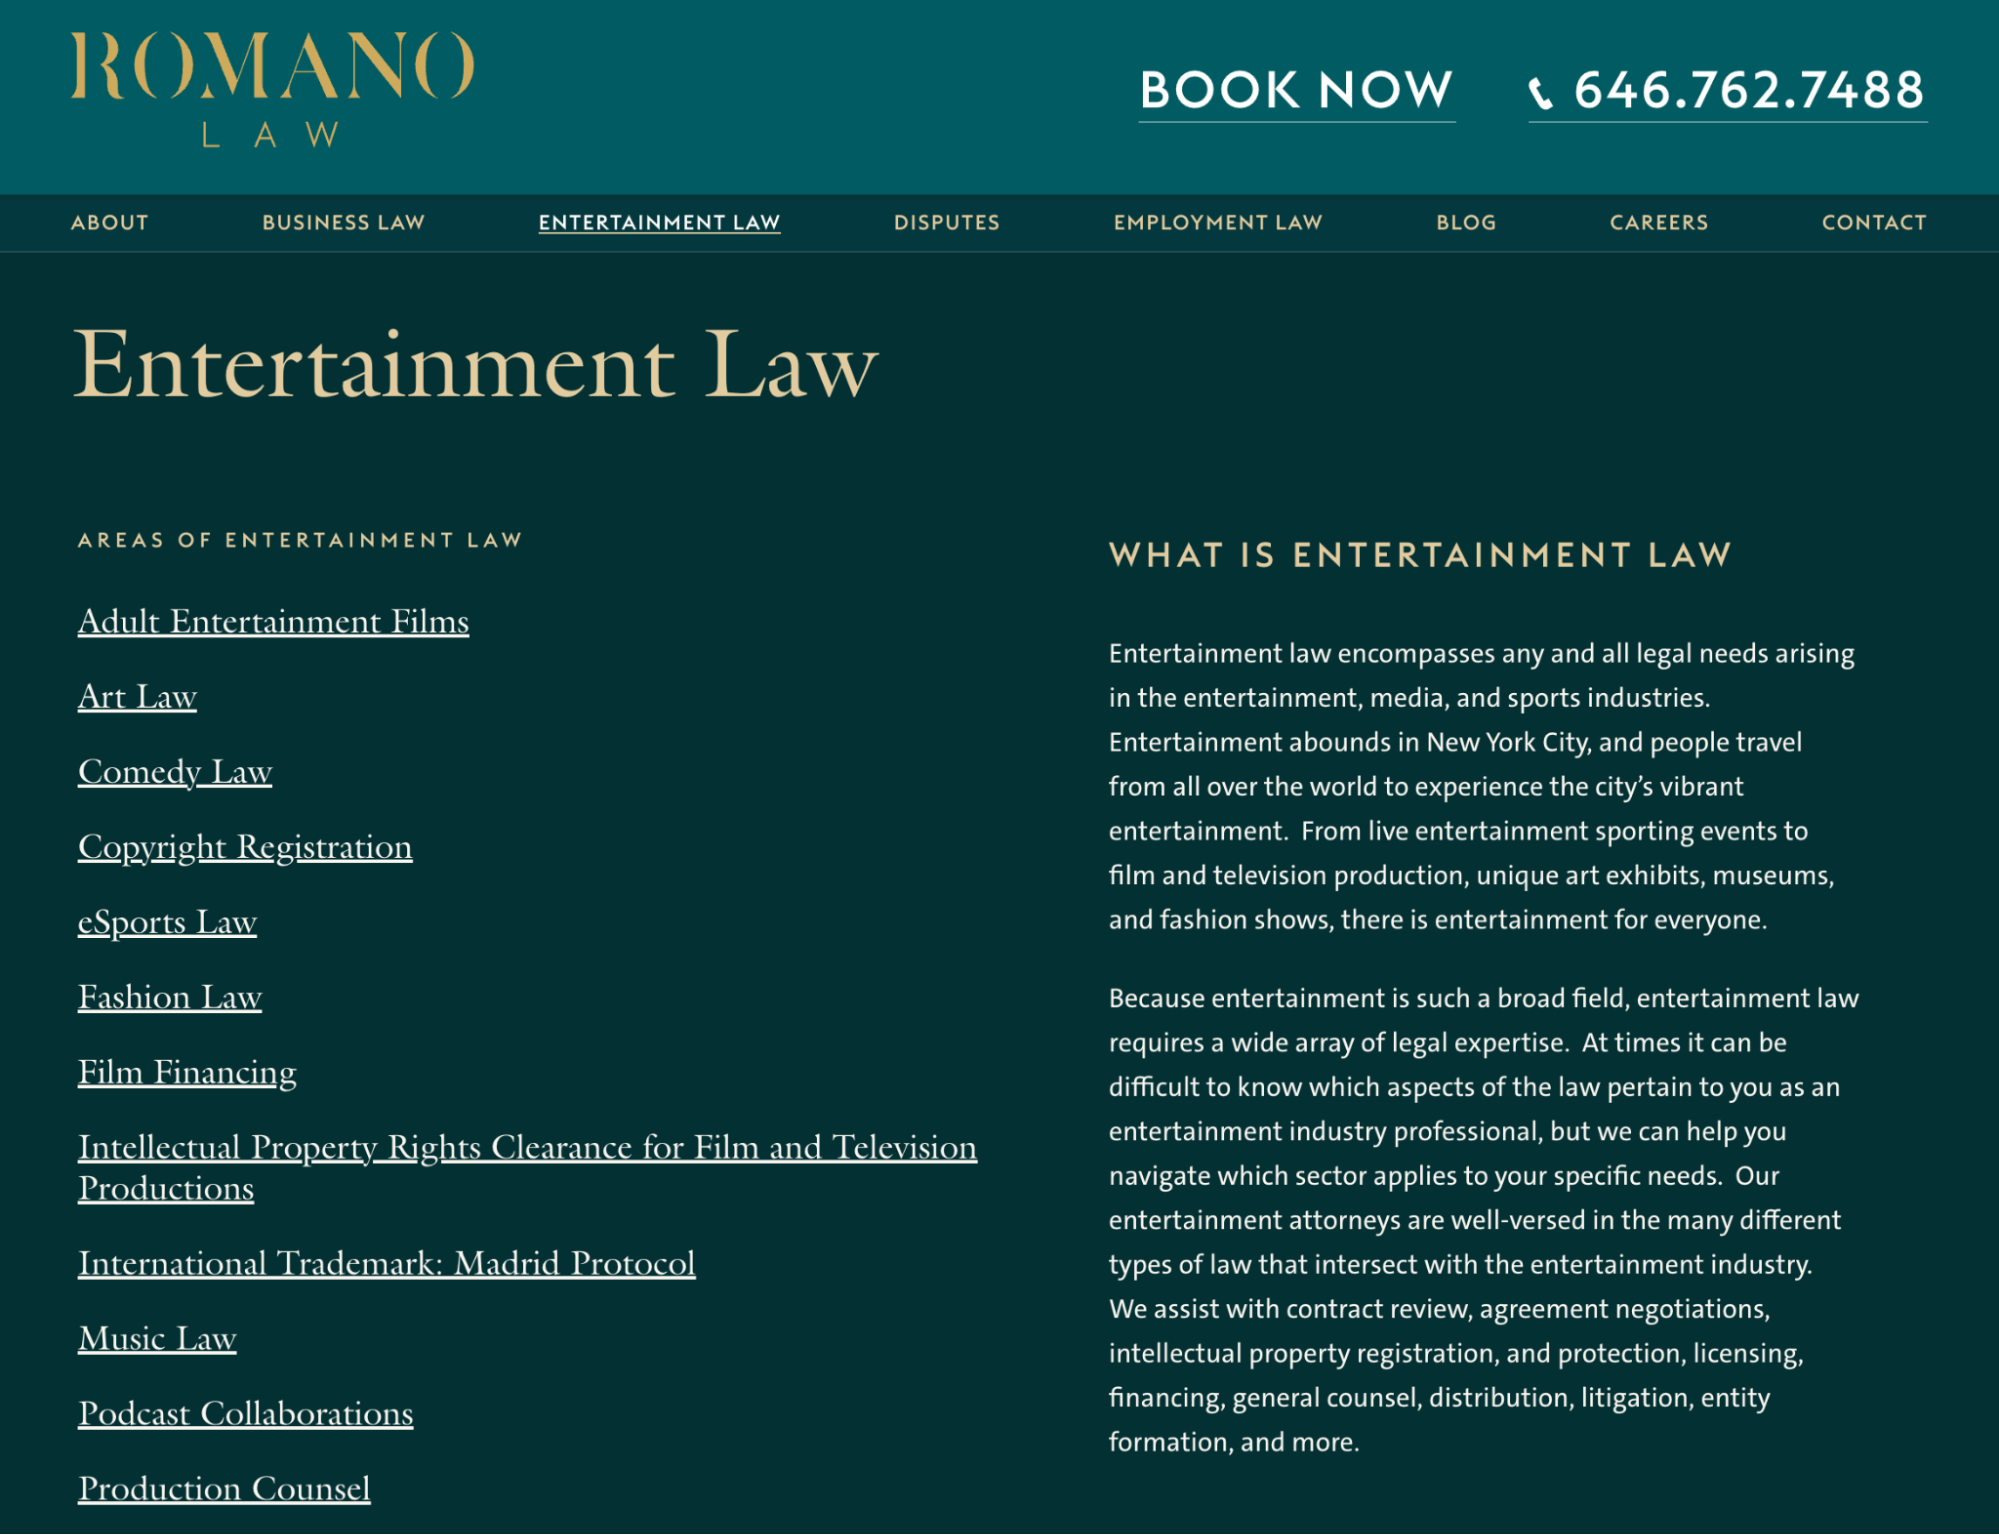 Content hub with general information on entertainment law and links to relevant areas on the left